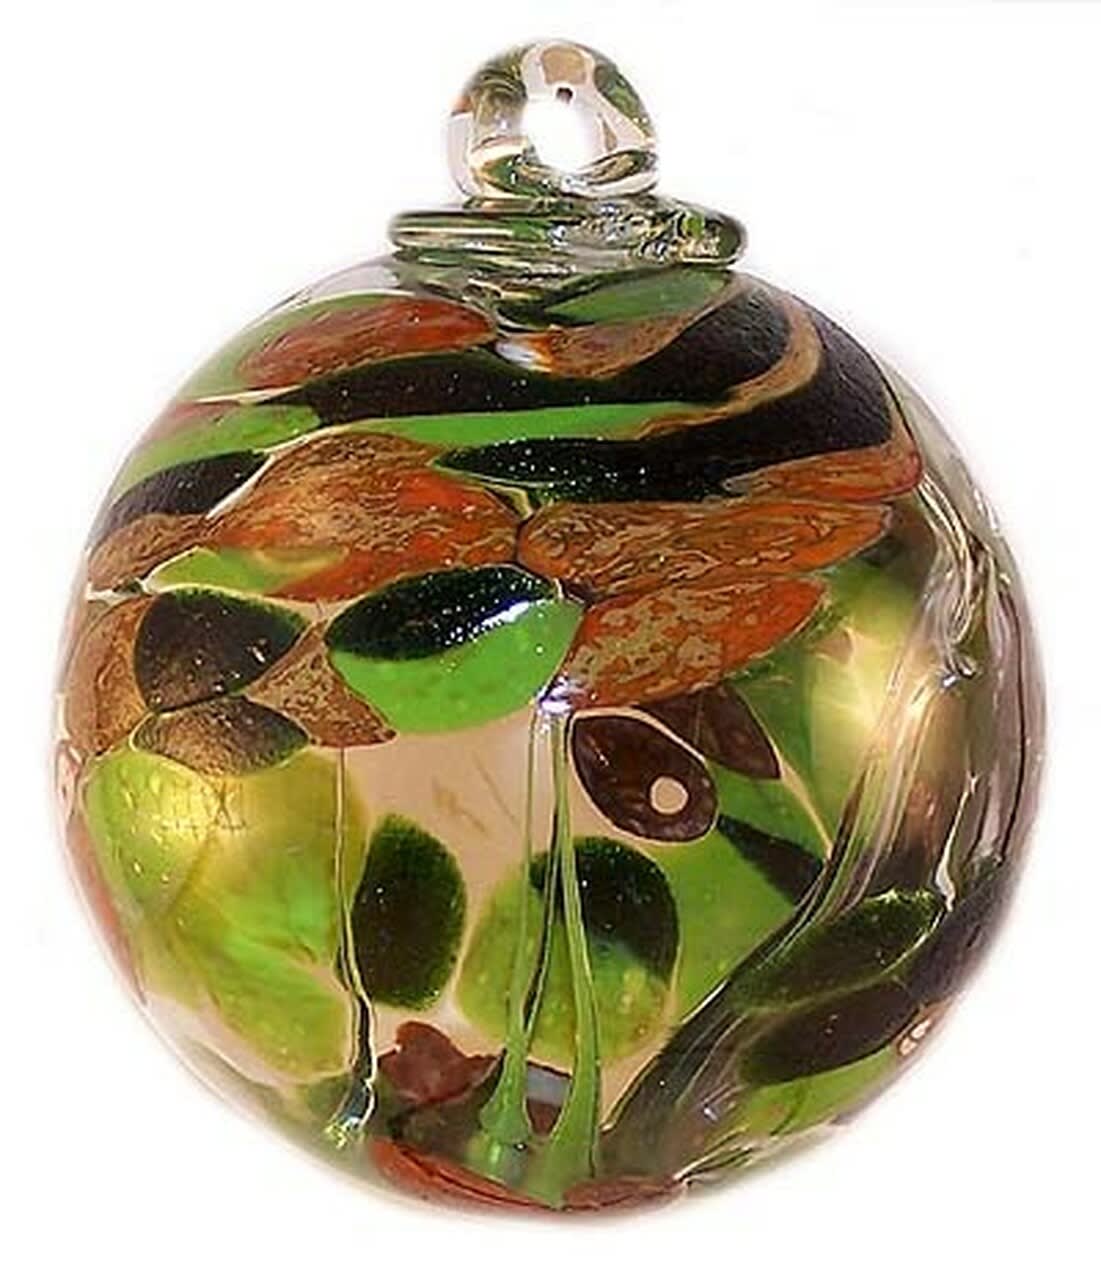 Iron Art Glass-Small Witch Ball Silver Nitrate Greens &amp; Burnt Orange - **Arrives in decorative gift bag** For over two hundred years, the superstition behind Witch Balls has traveled from England to New England. The magic of a Witch Ball is to ward off evil spirits, witch's spells, and ill fortune by capturing them in the hollow interior. As the spirit is mesmerized by the ball's color and reflection, it enters the ball and is caught by it's web-like inside. Our glass Witch Balls are made from recycled glass in the Carpathian Mountains; the land of superstition, old world mystery and storybook folklore. As the ball is molten hot, the glass is formed, the ball is rolled into colored glass granules to provide the design. With this process each of our Witch Balls are uniquely handcrafted and no two are alike. Let the magic of our Witch Balls decorate your home.  Width: 4.00 (in) 